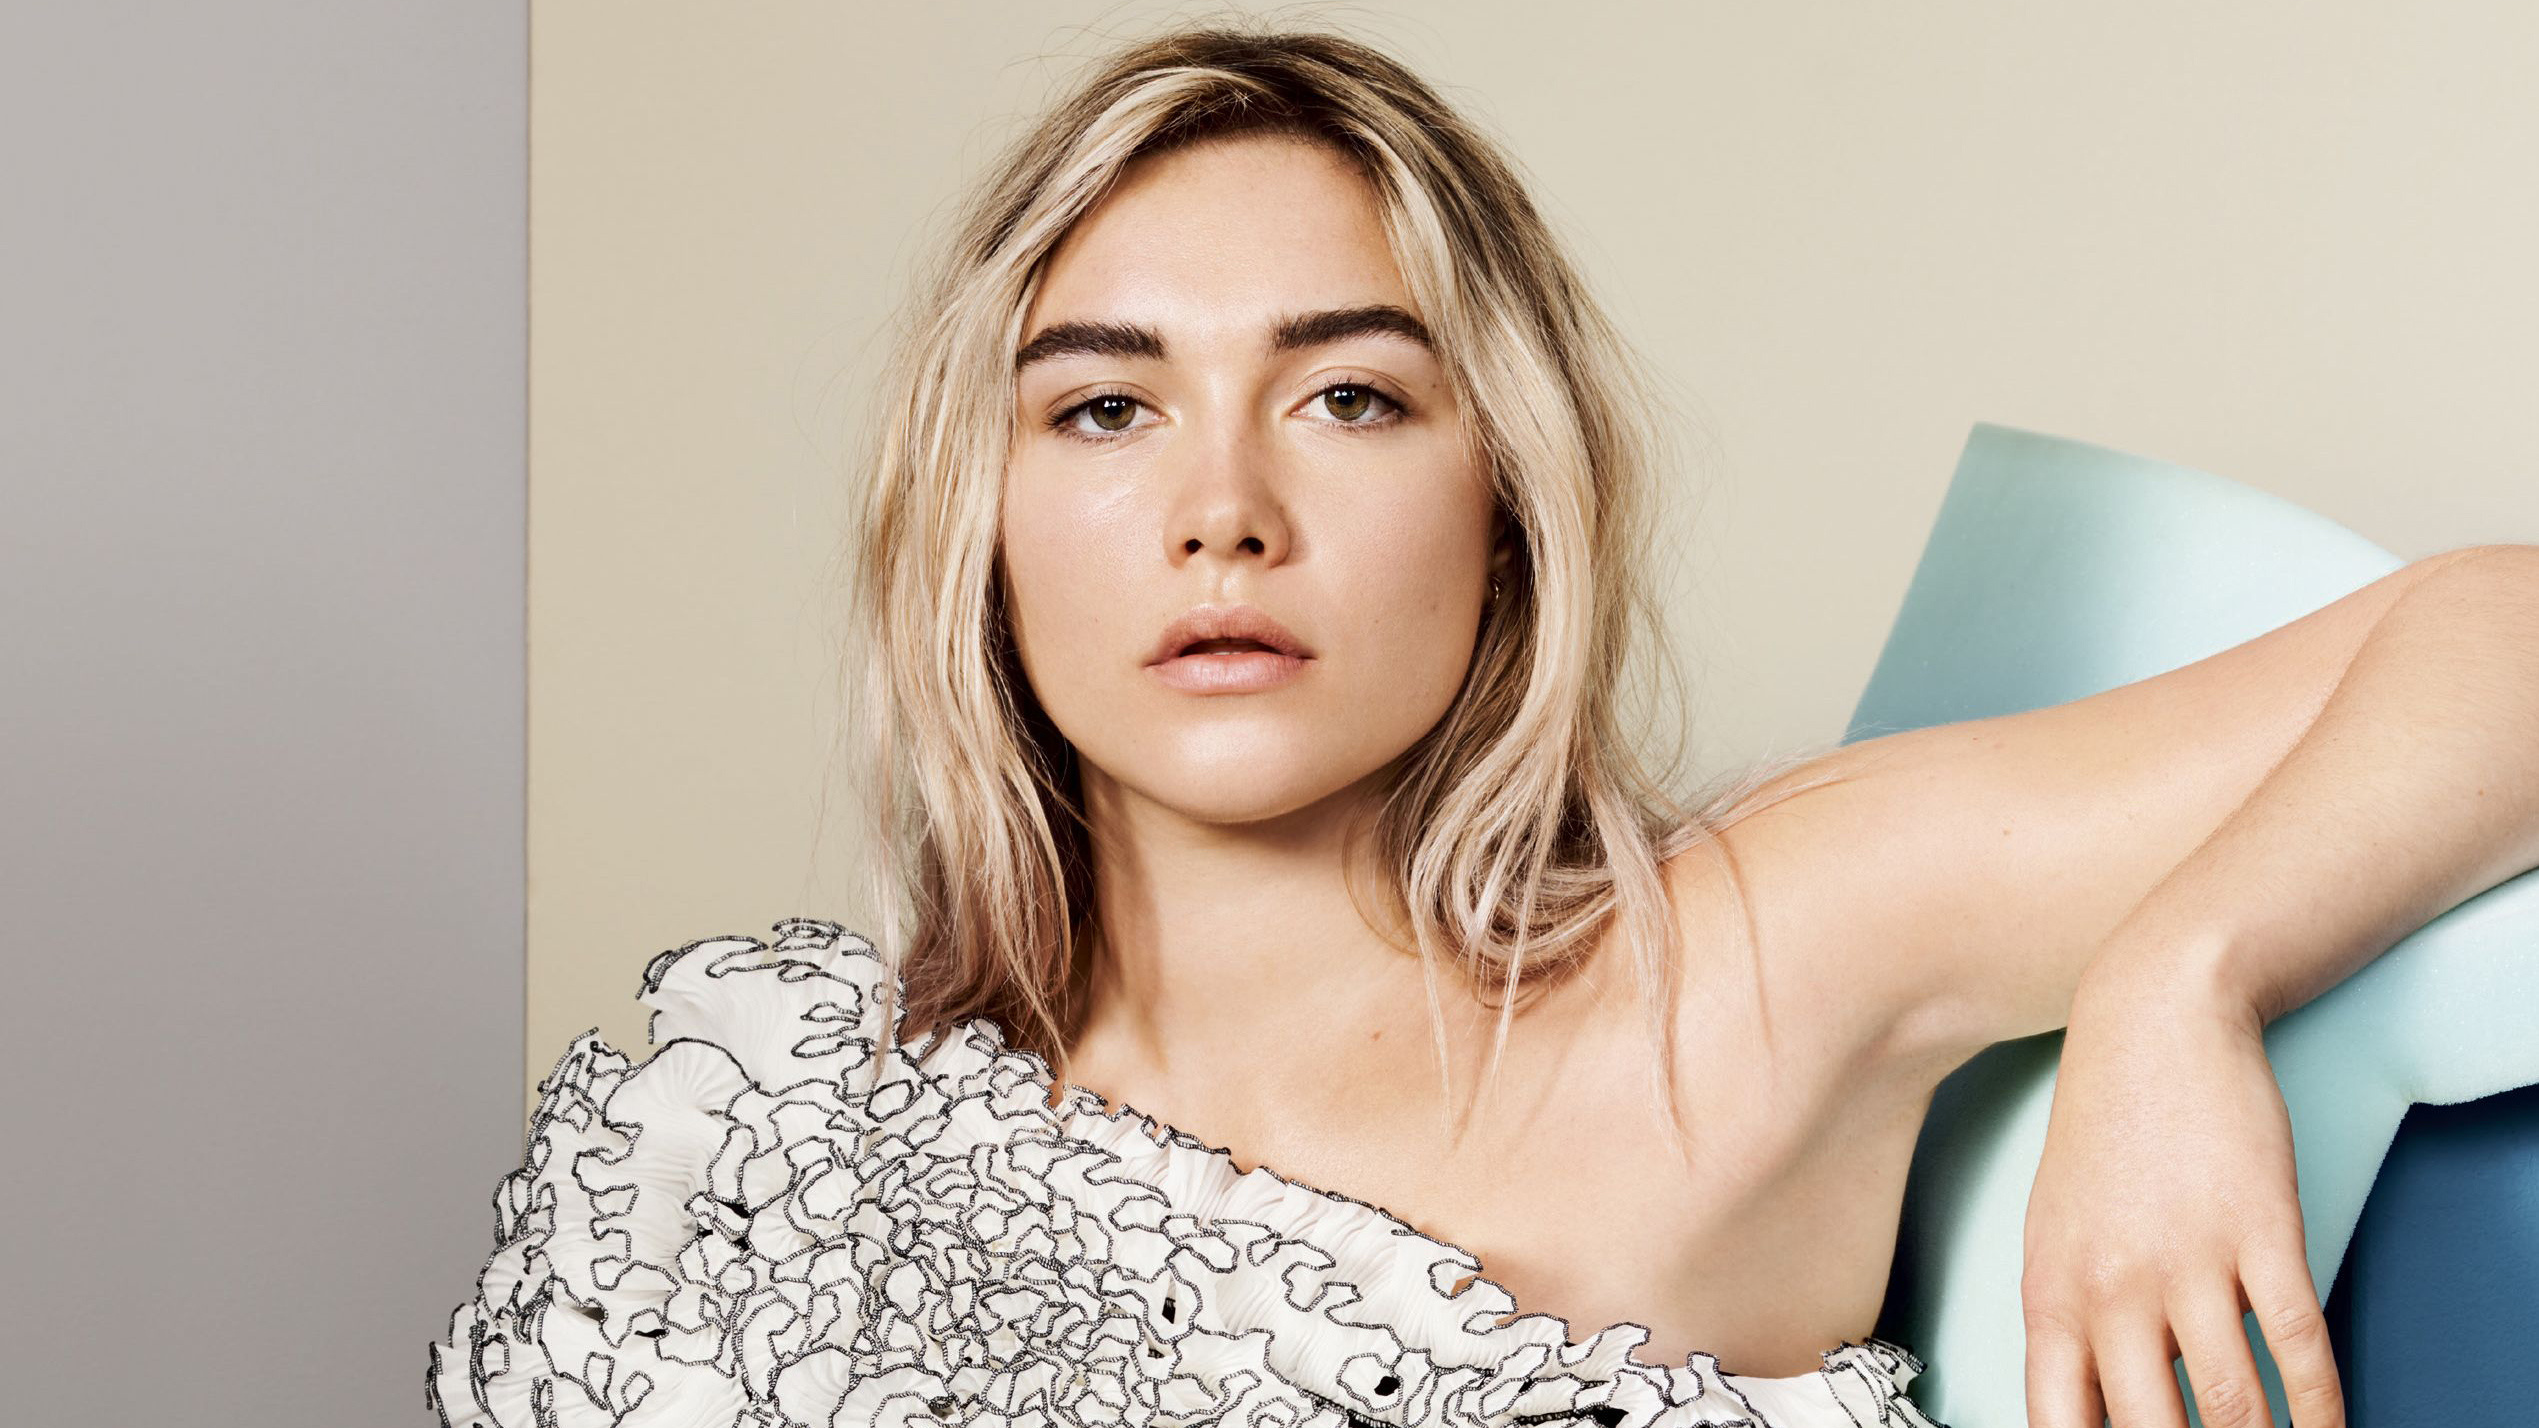 Florence Pugh wallpaper, Celebrity admiration, Aesthetic appeal, Personalized device background, 2540x1430 HD Desktop